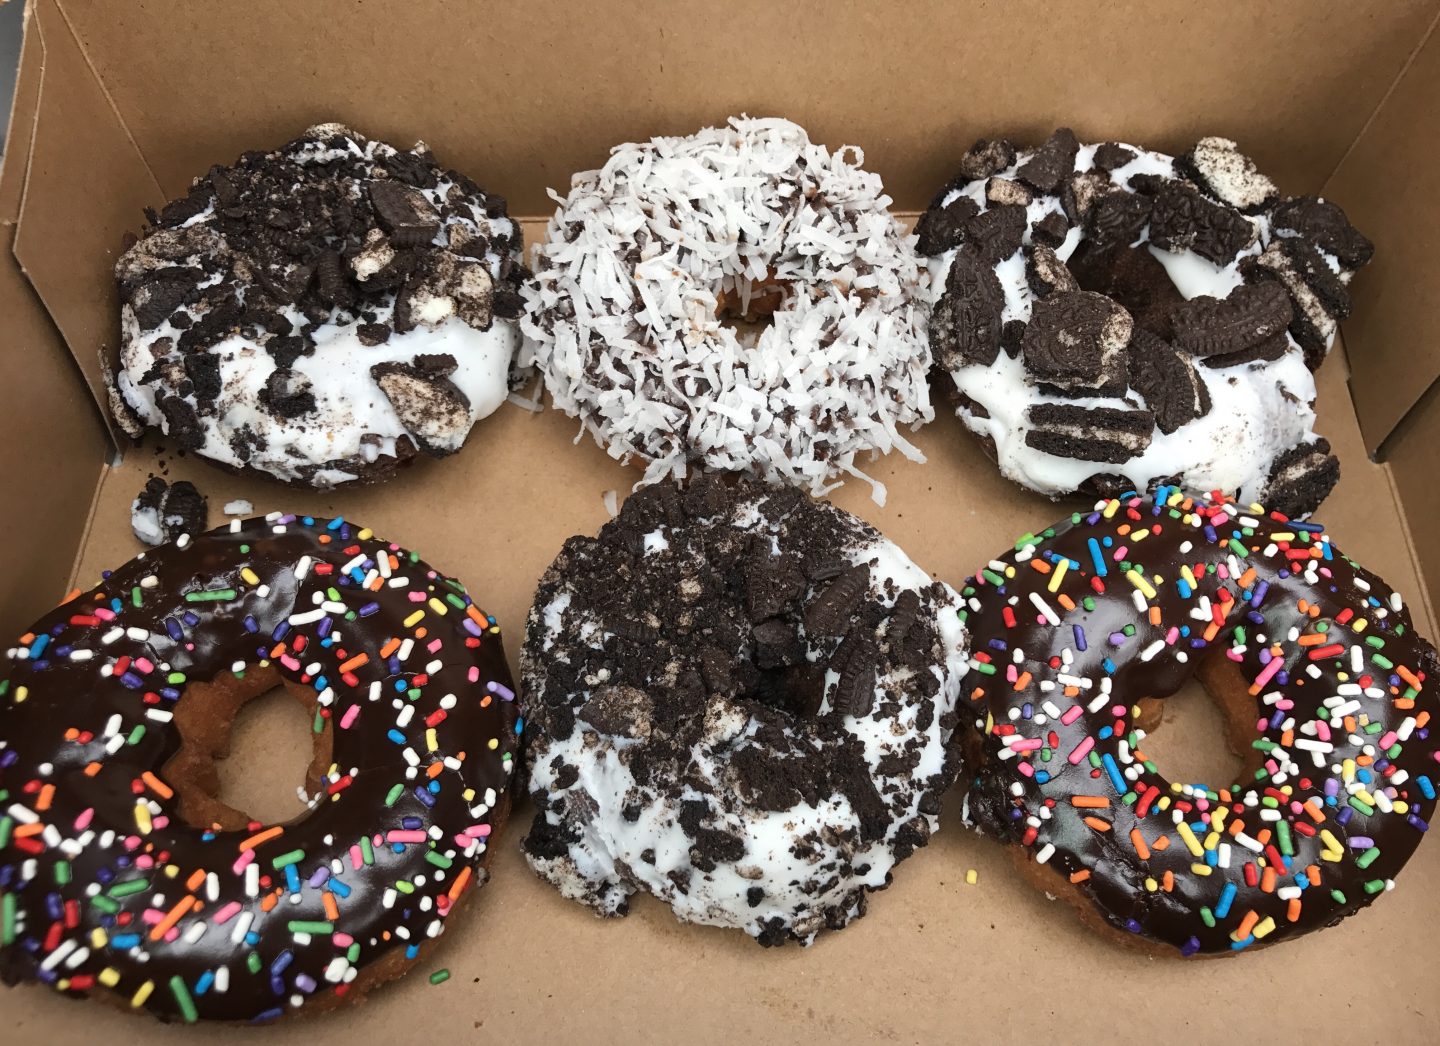 We loved the textures and flavors of Top Pot Doughnuts!